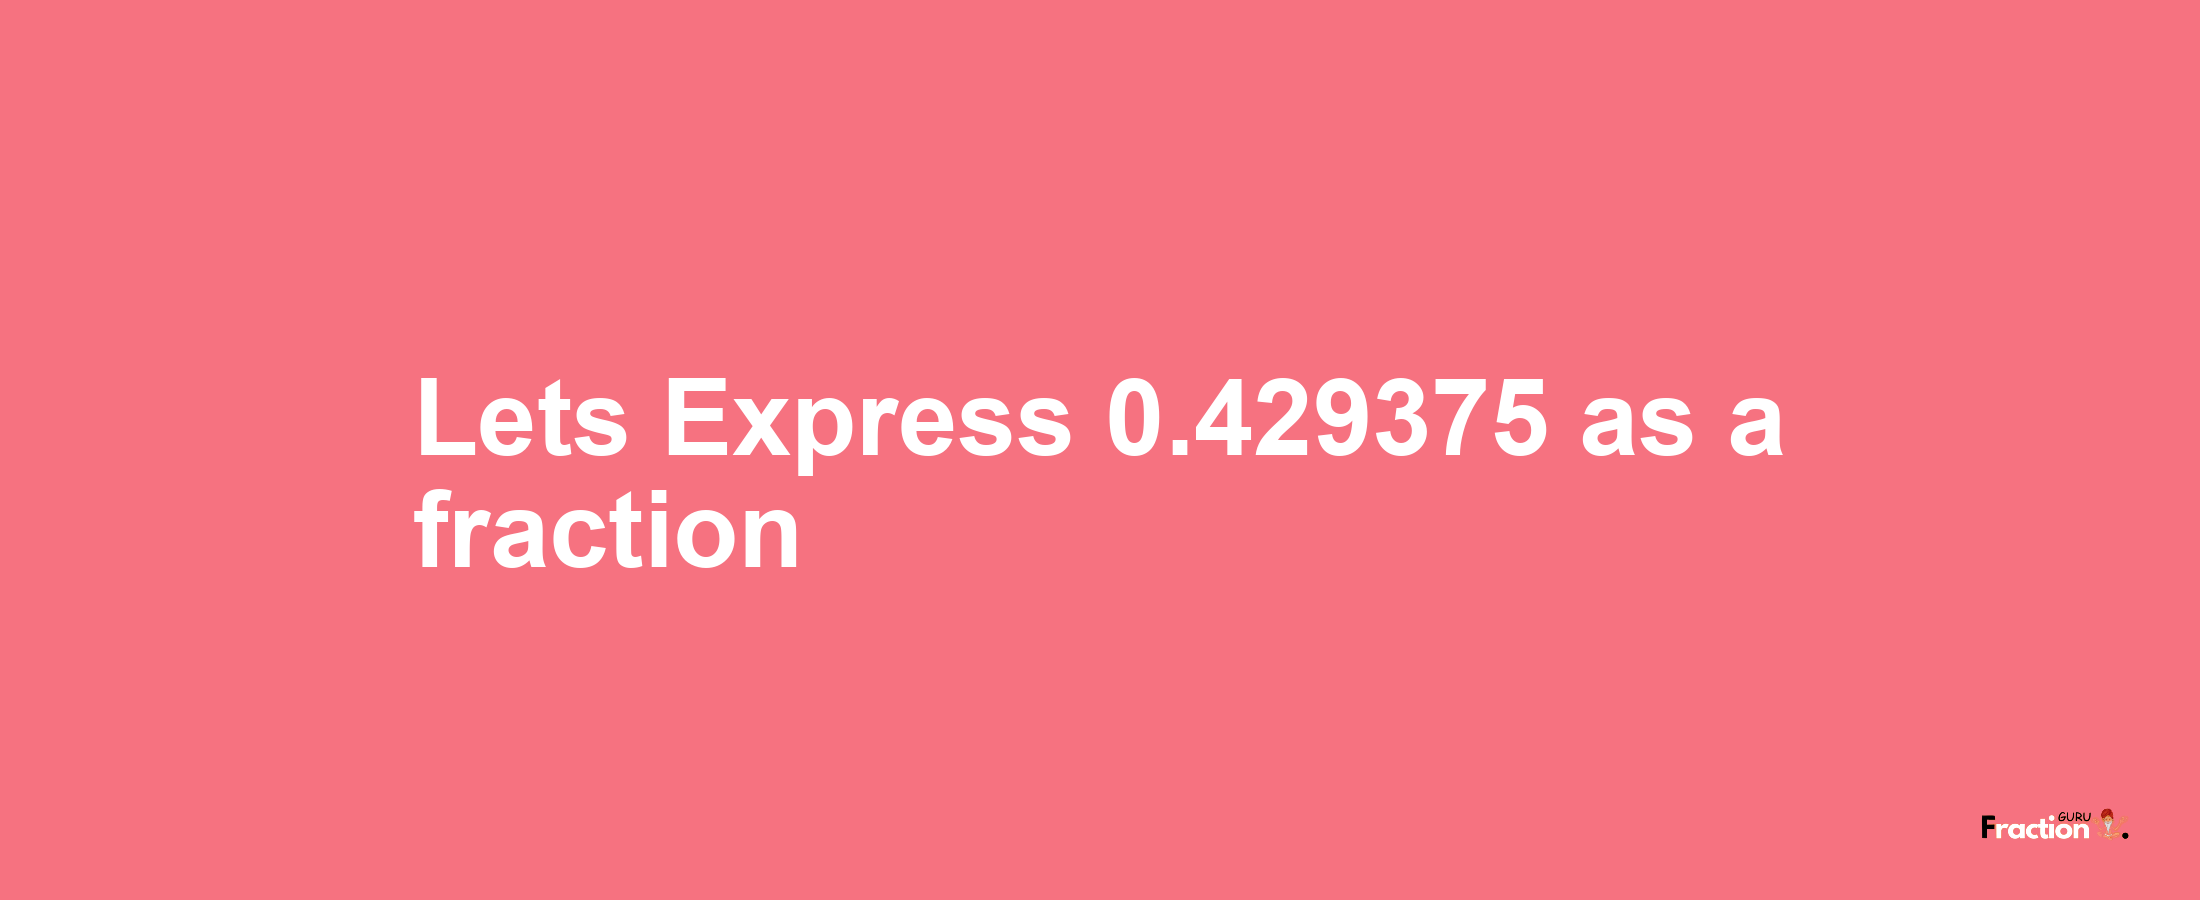 Lets Express 0.429375 as afraction